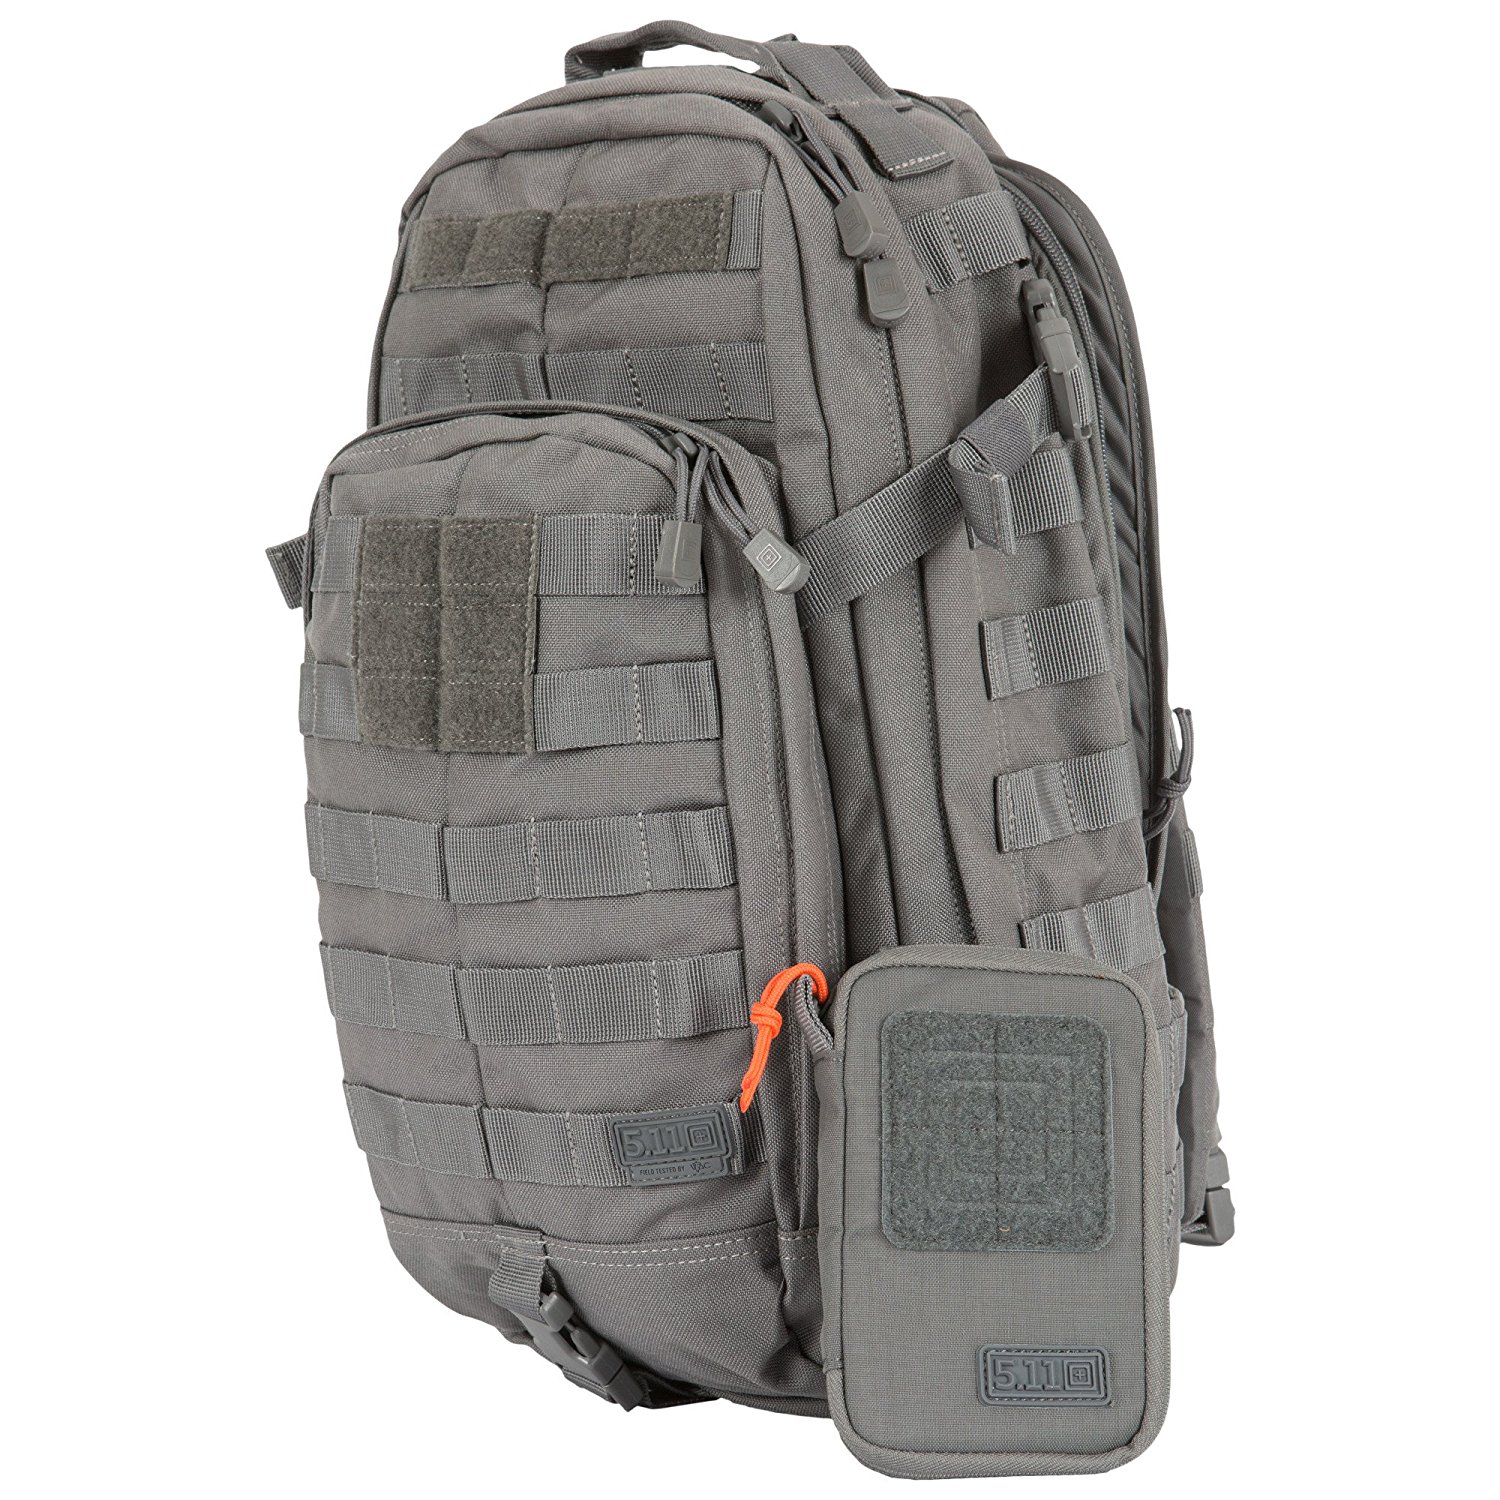 image of 5.11 Rush MOAB 10 Tactical Backpack